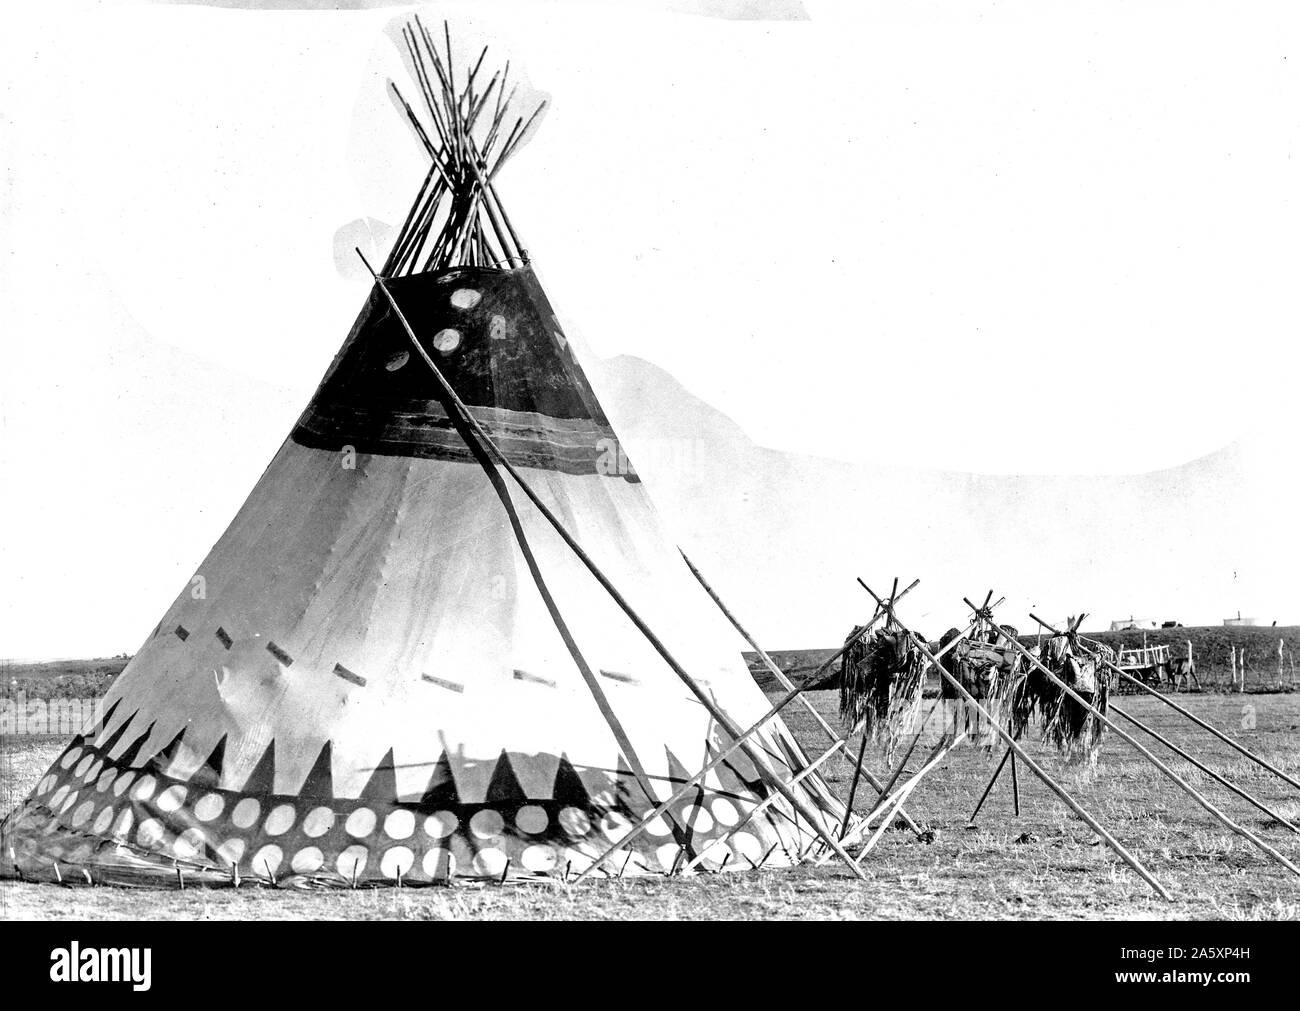 Edward S. Curits Native American Indians - Tepee on the plains of Alberta, Canada ca. 1927 Stock Photo